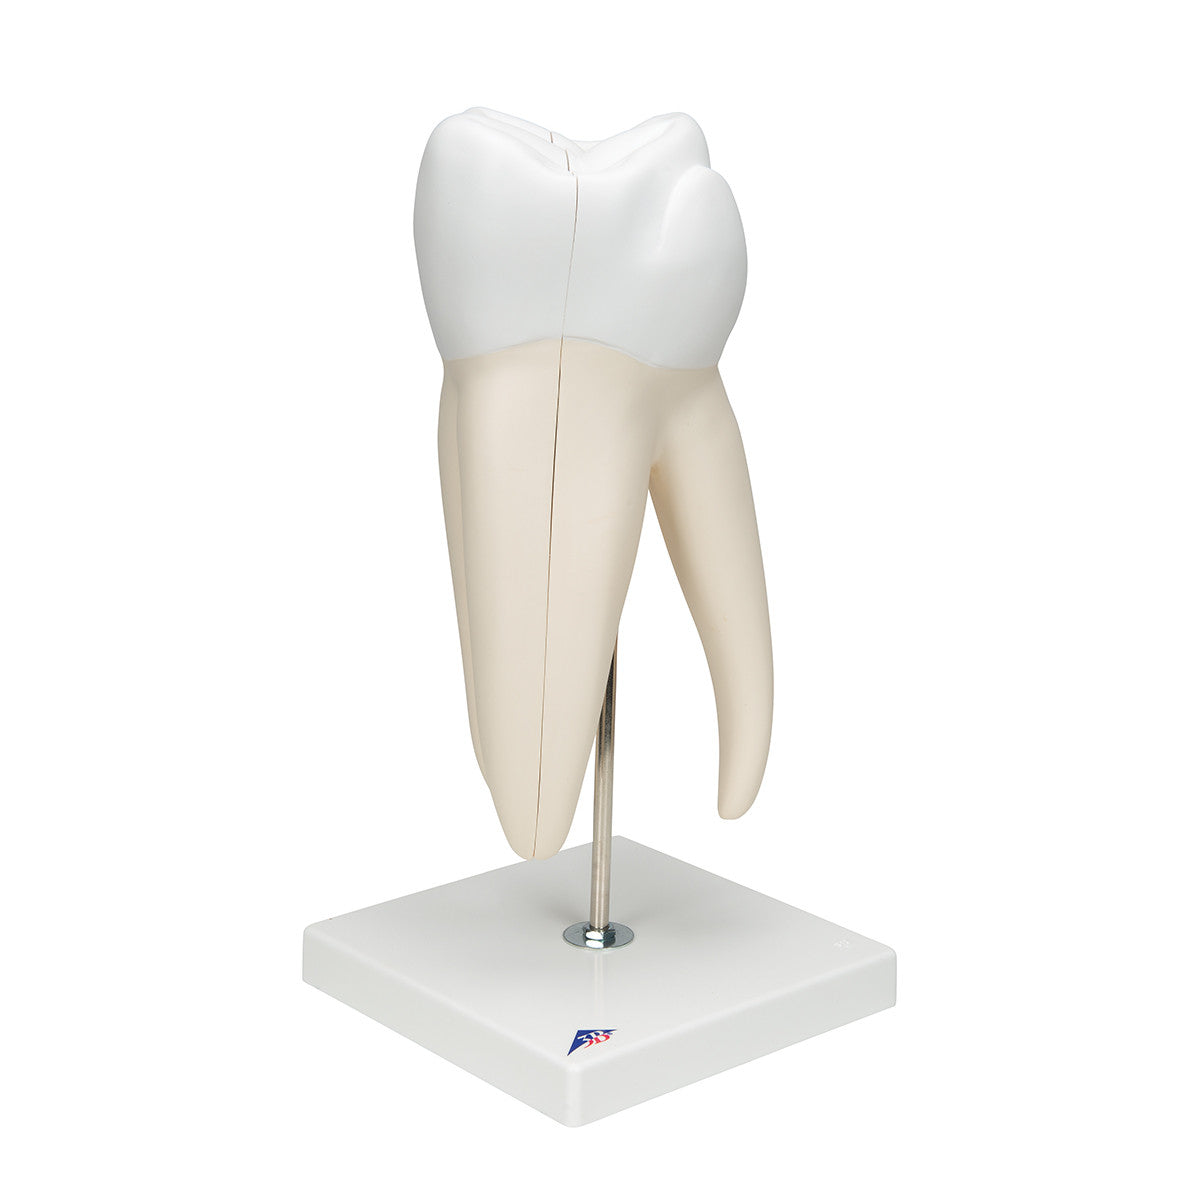 Giant Molar with Dental Cavities Human Tooth Model, 15 times Life-Size, 6 part